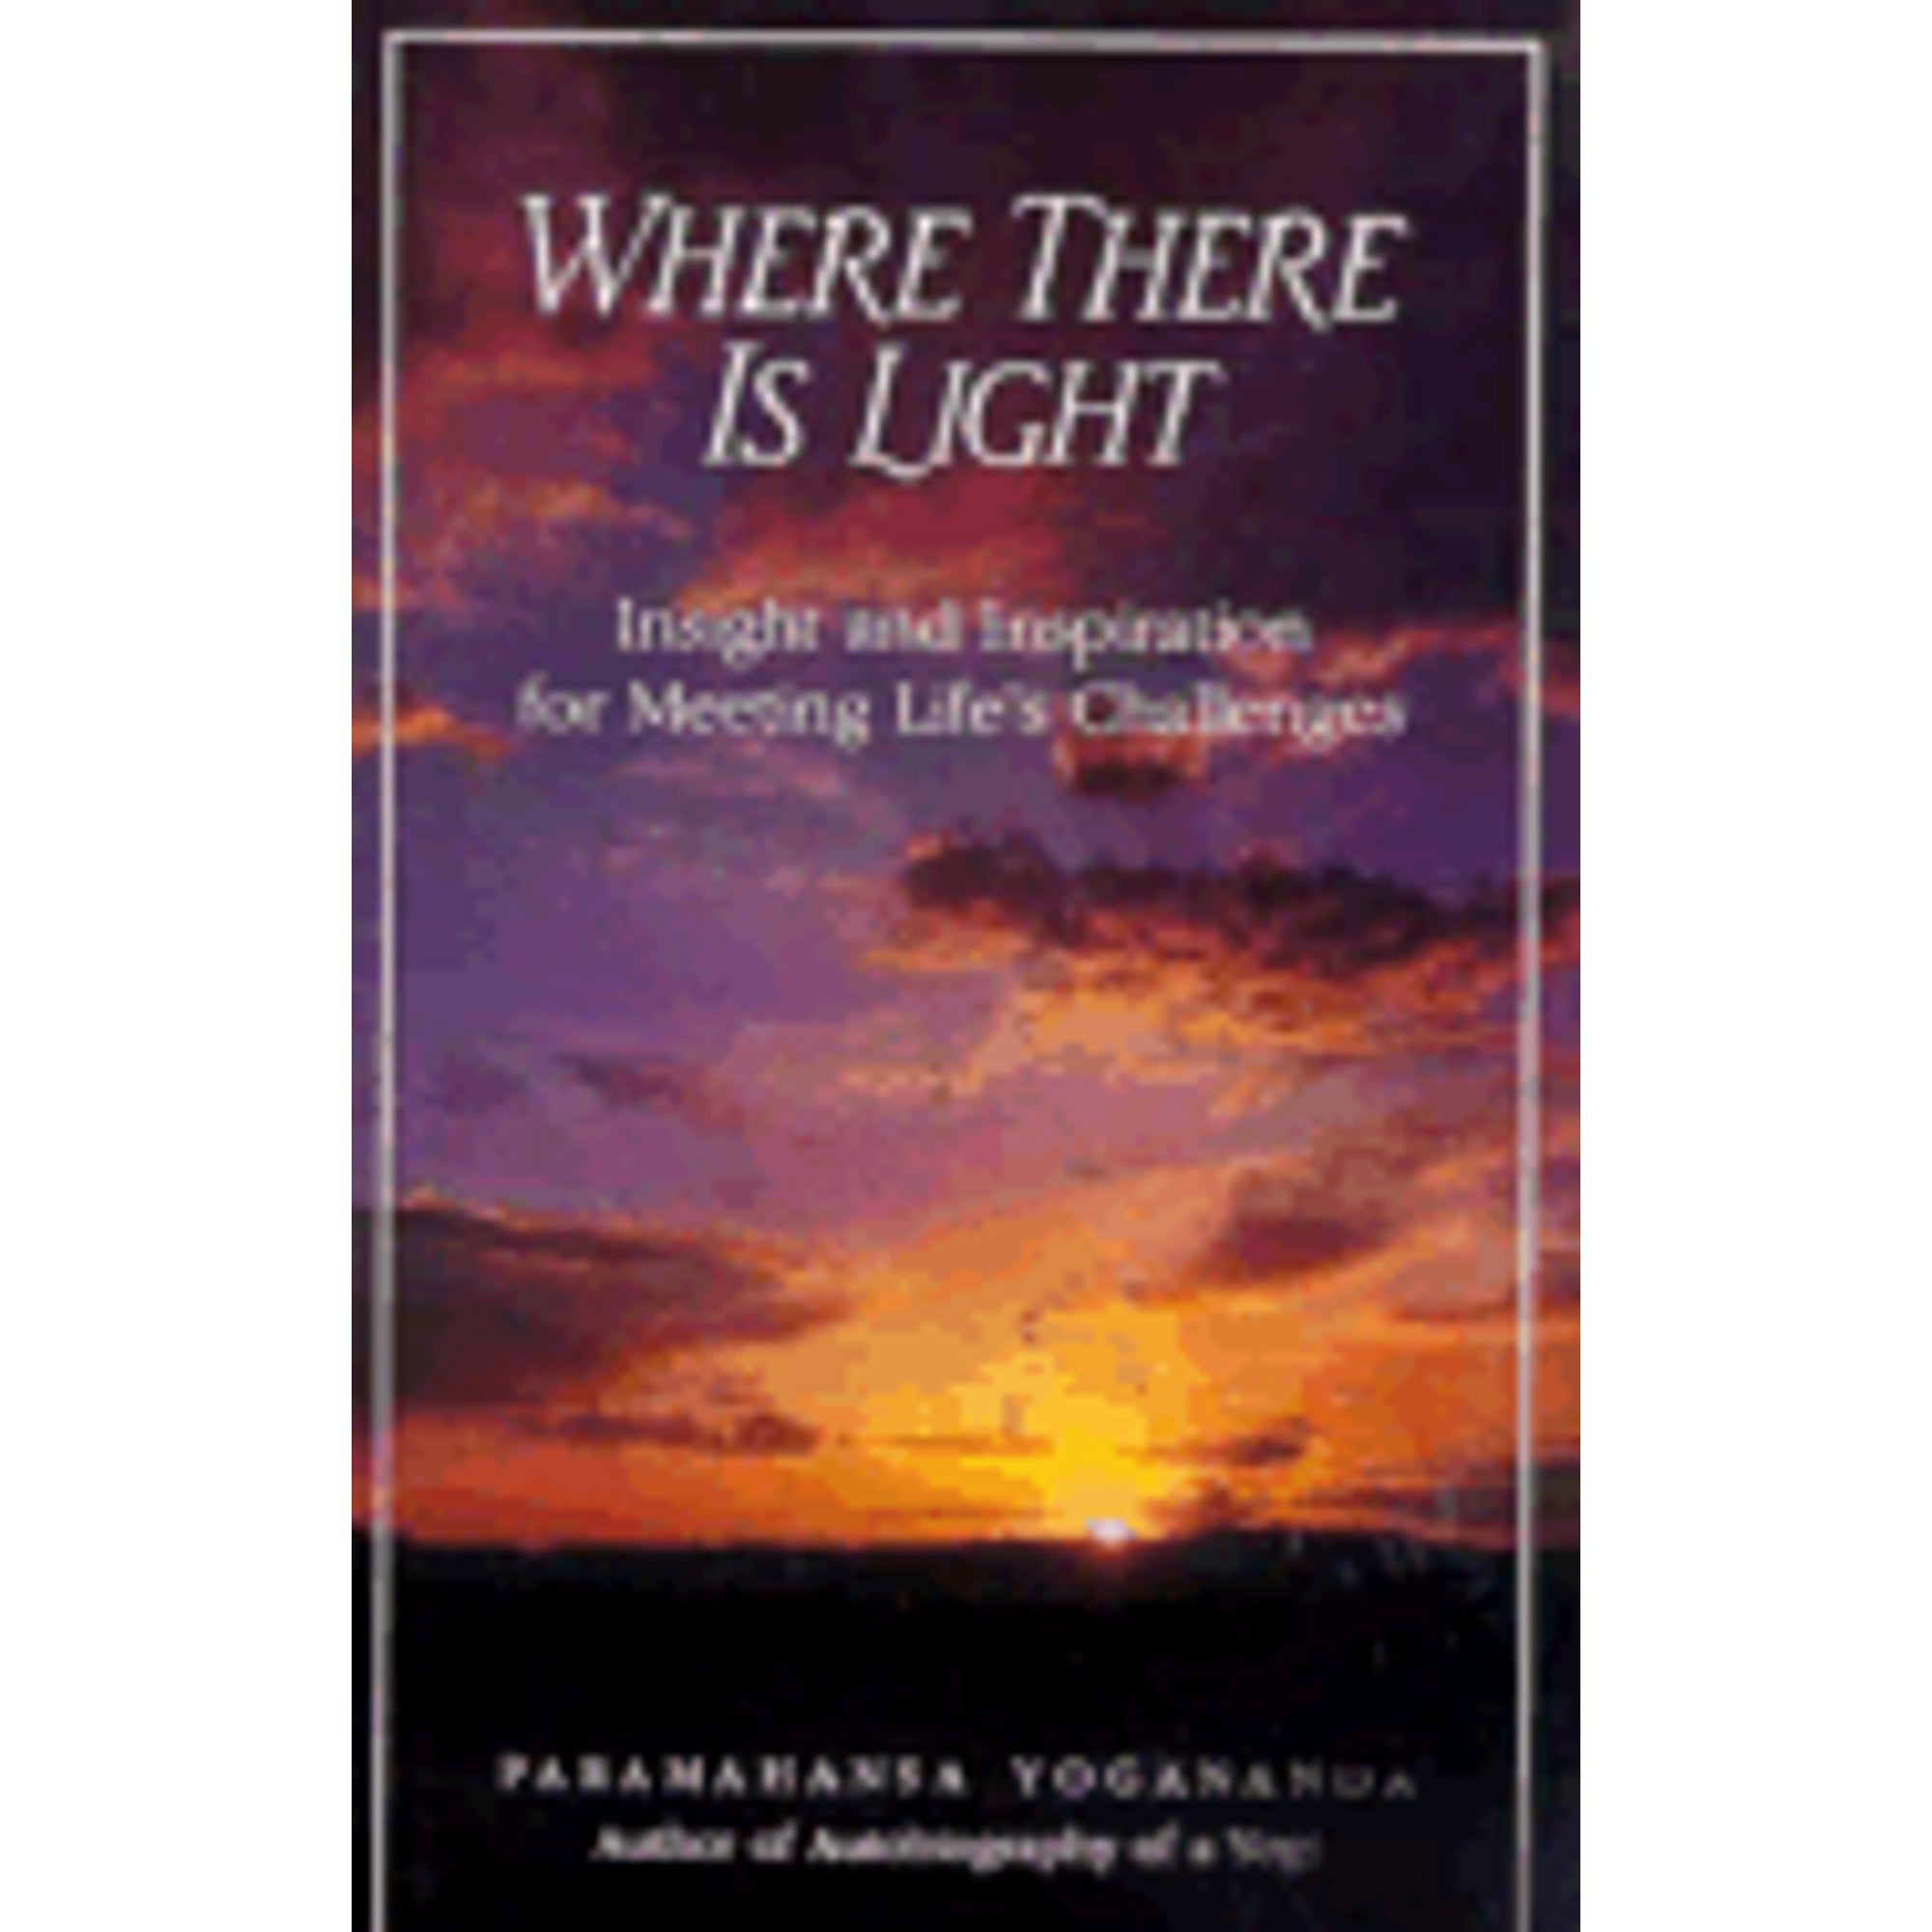 Pre-Owned Where There is Light: Insight and Inspiration for Meeting Life's Challenges (Hardcover) by Paramahansa Yogananda